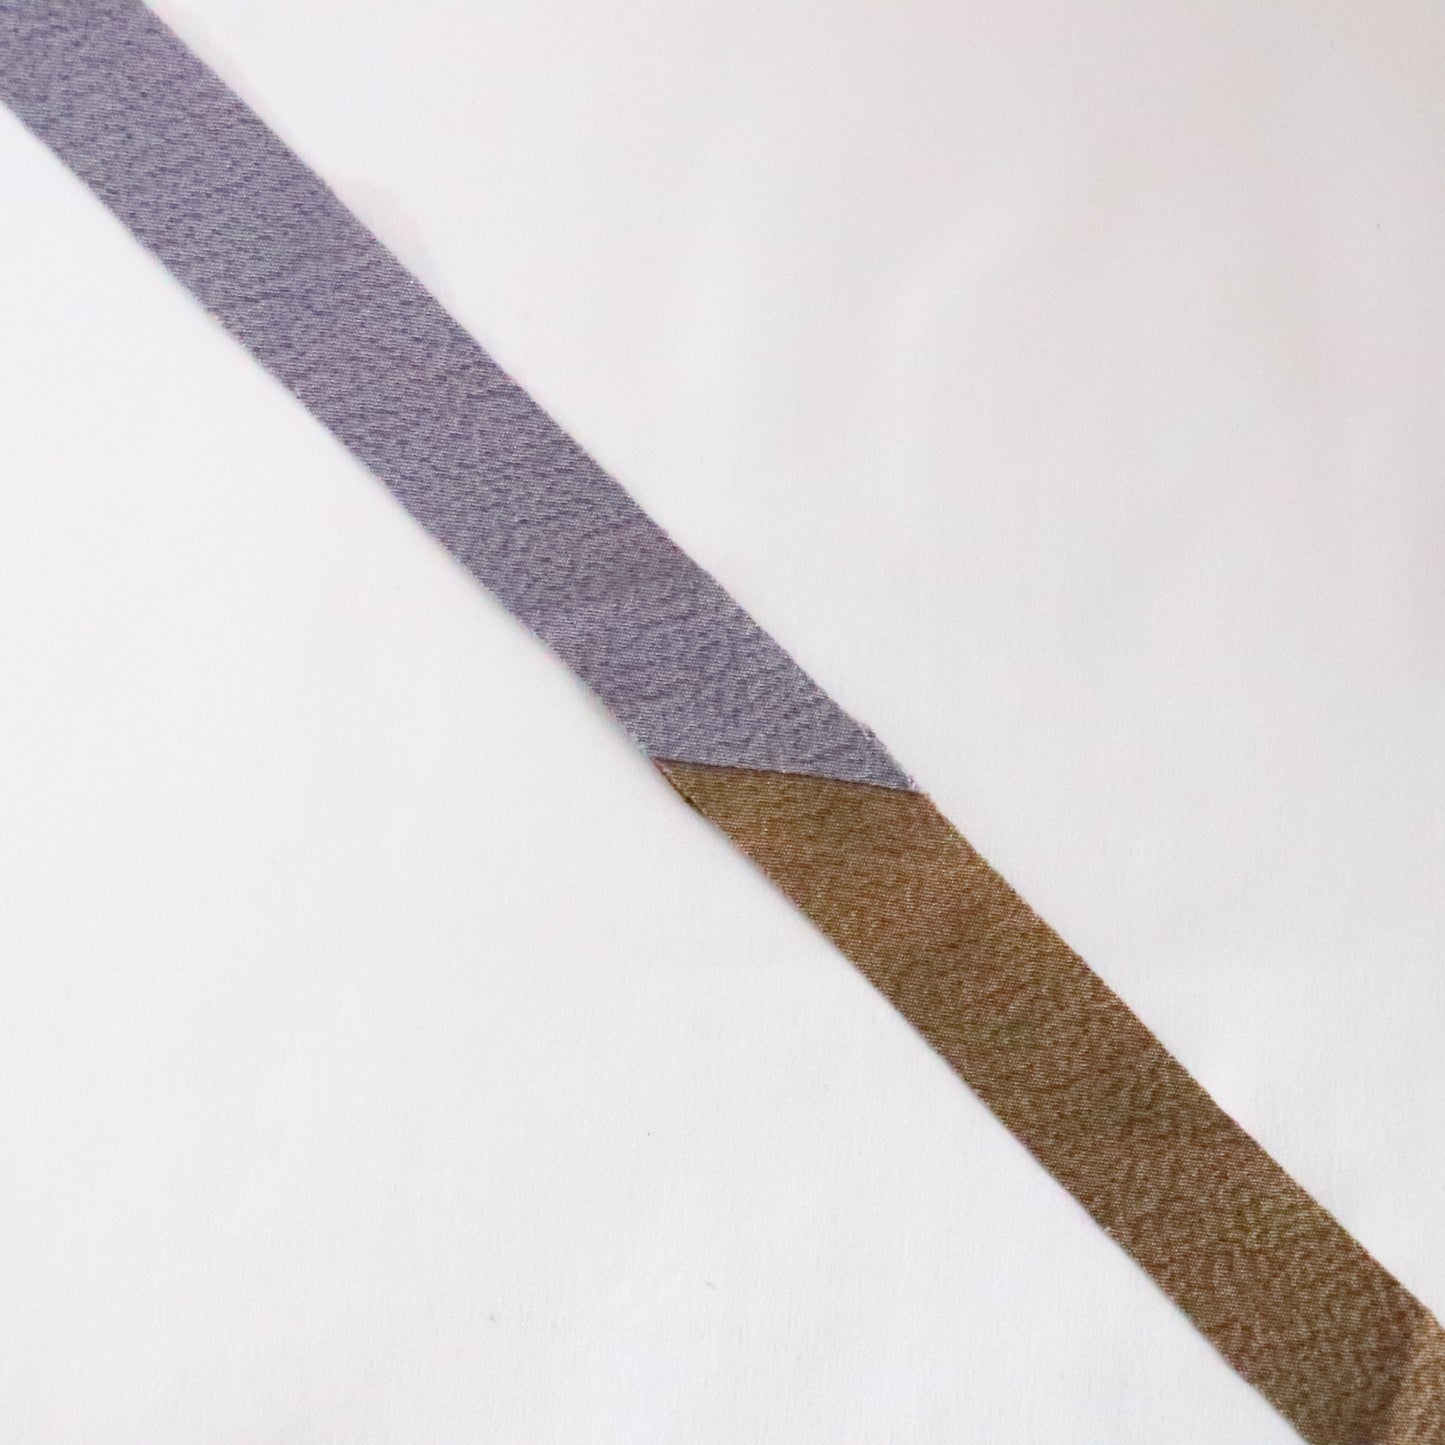 Plain soot color (bitter purple) with some ocher and crepe (Y02312019)